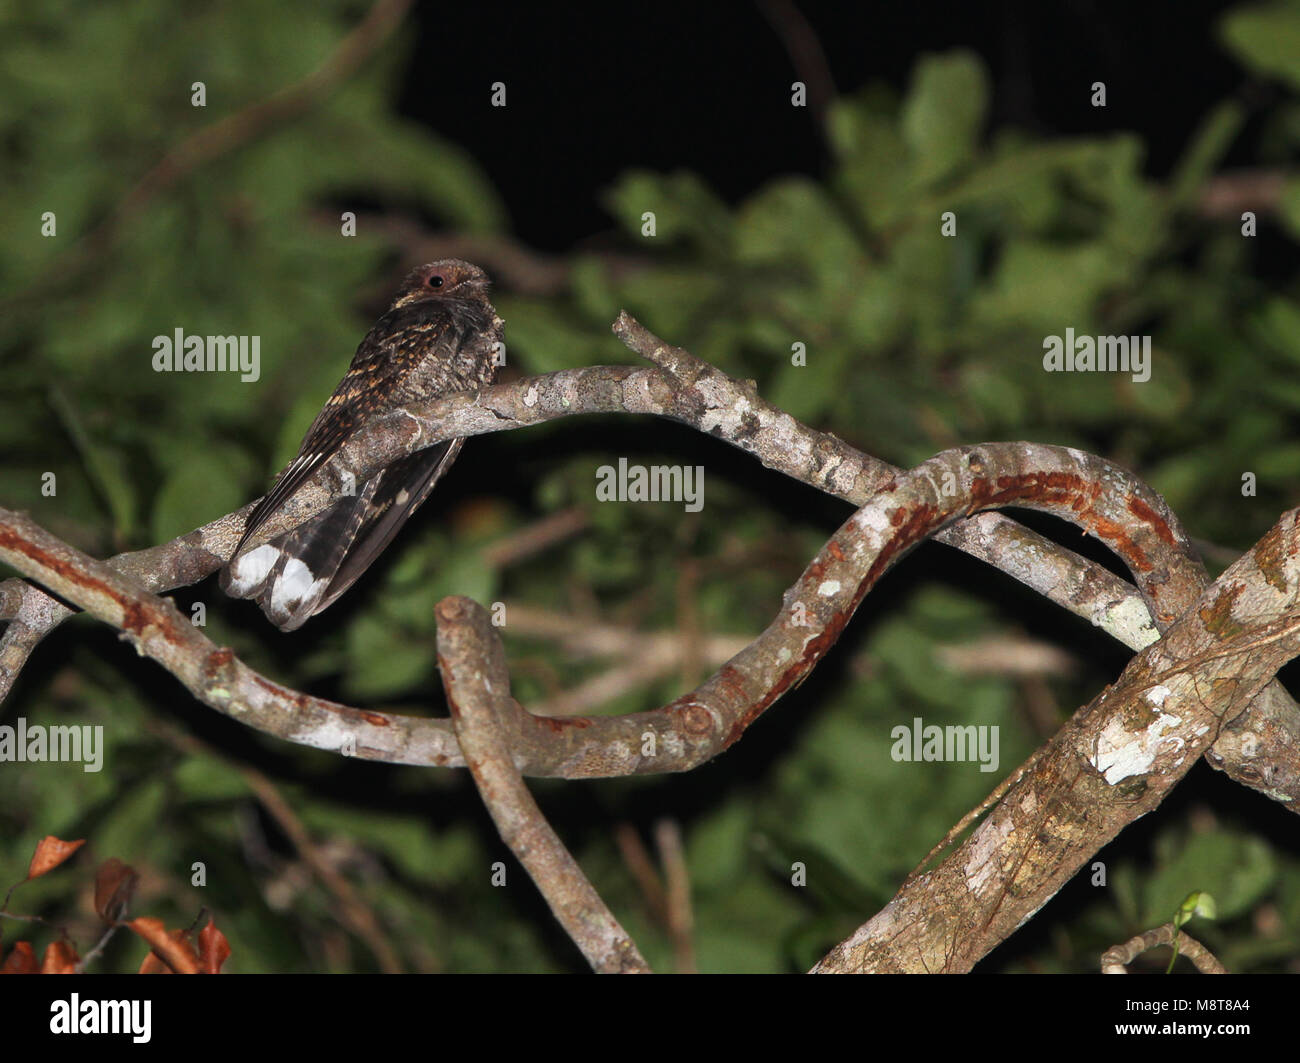 The Mees's nightjar (Caprimulgus meesi) is a member of the nightjar family (Caprimulgidae) described as new to science in 2004. It is found on Flores Stock Photo